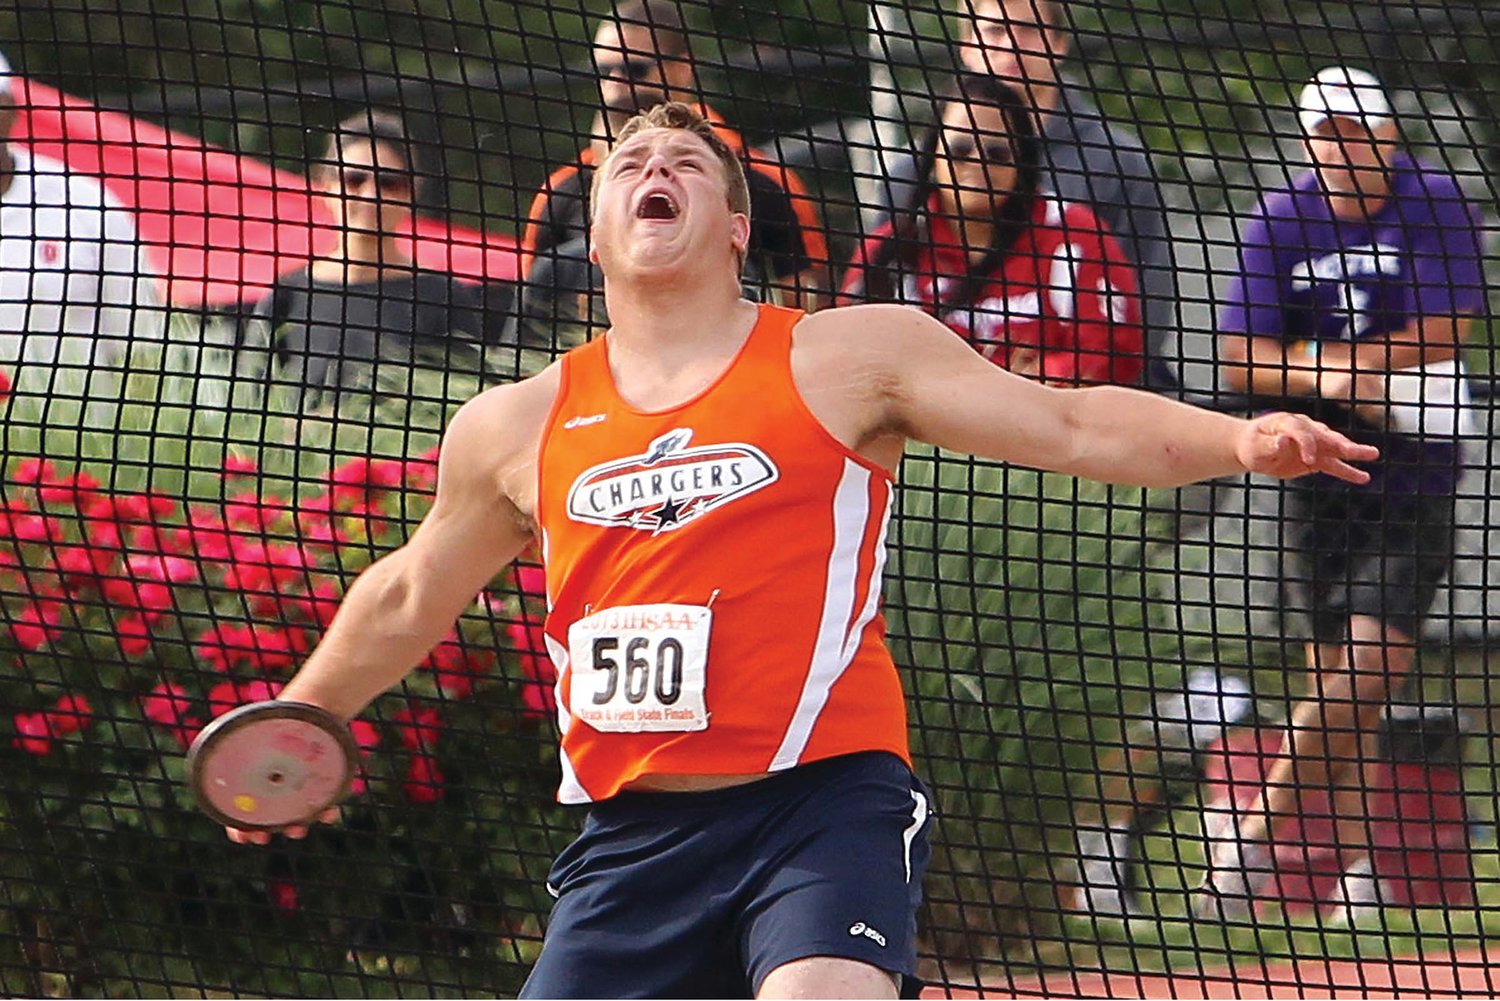 North Montgomery grad Dakota Ramey was a two-time state placer in the discus.